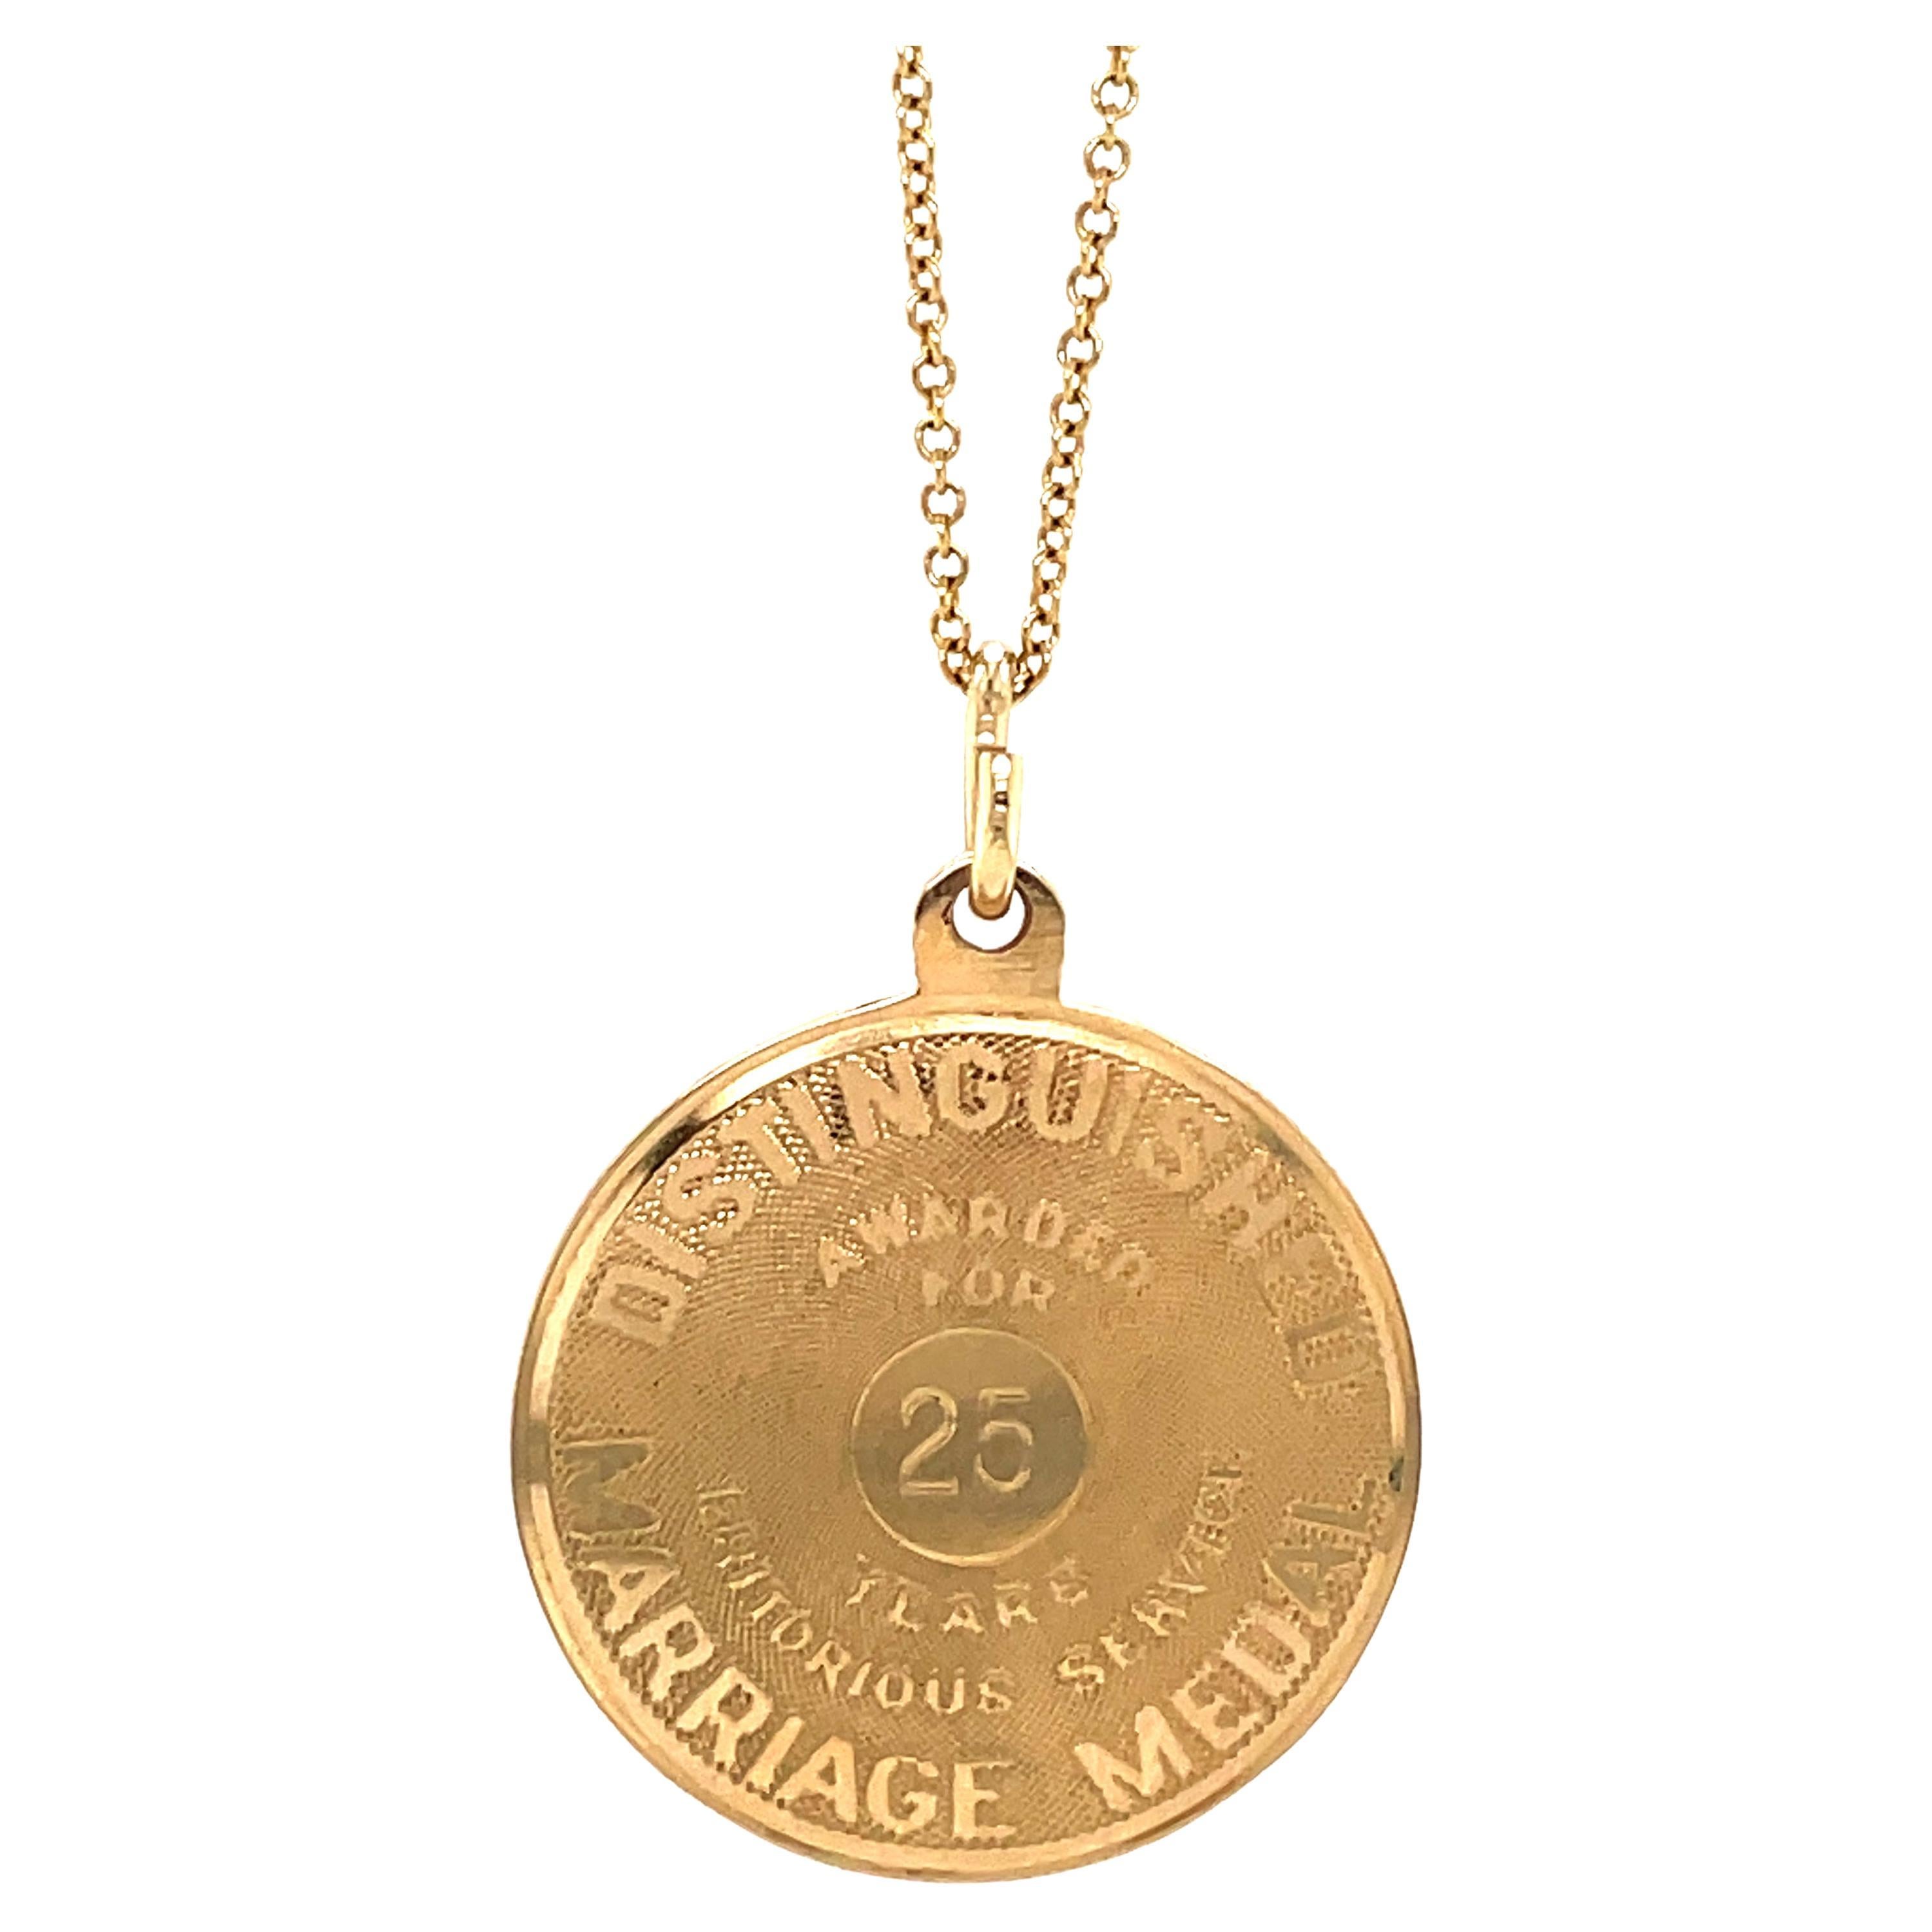 25 Year Marriage Medal Gold Charm